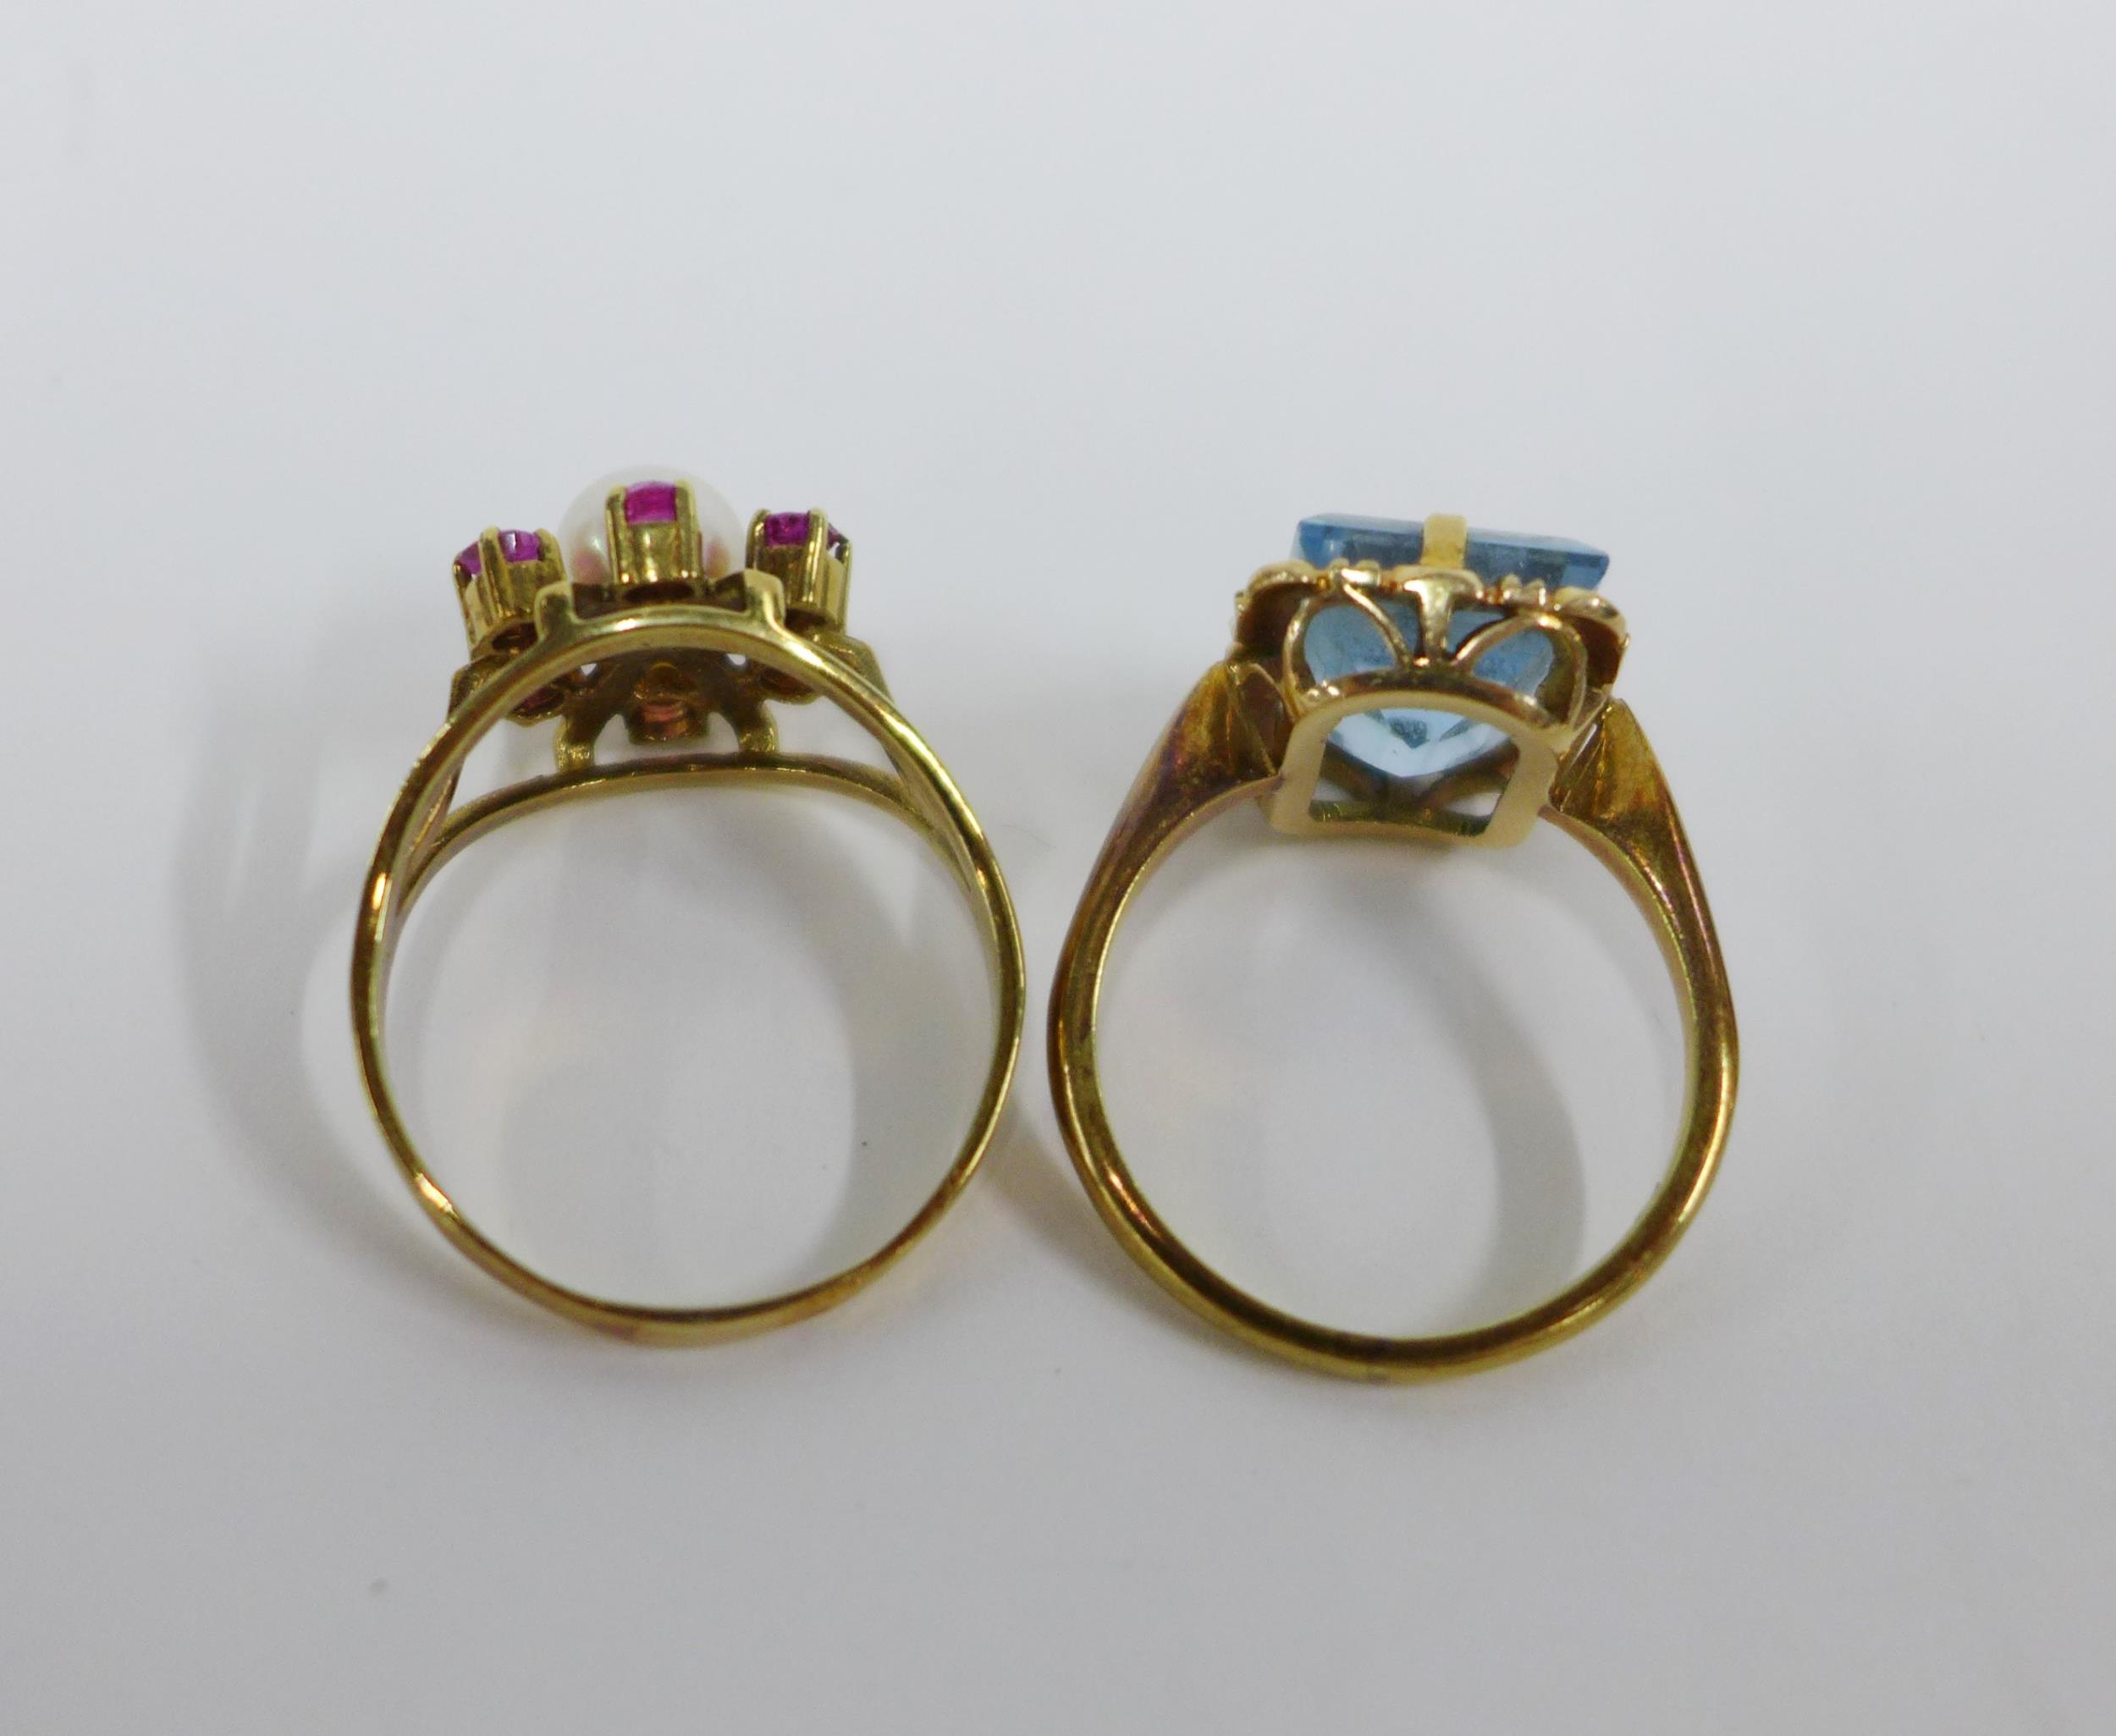 15ct gold dress ring with an emerald cut stone, another dress ring on an unmarked yellow metal - Image 3 of 4